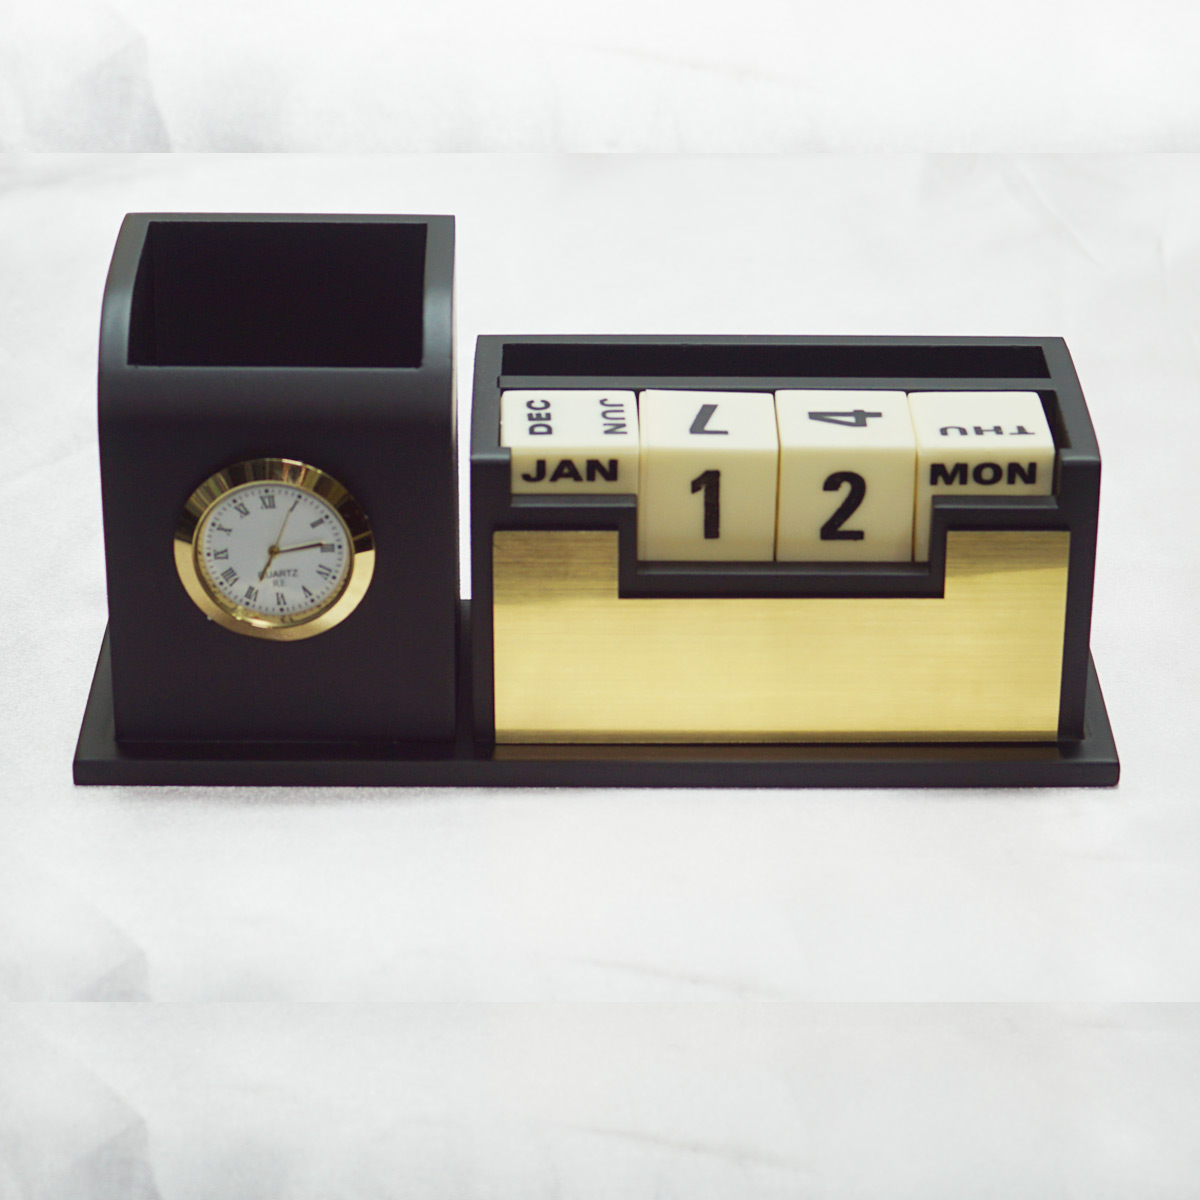 penhouse.in Customized Plastic Pen Stand With Clock And Holder With Calender  SKU 87164